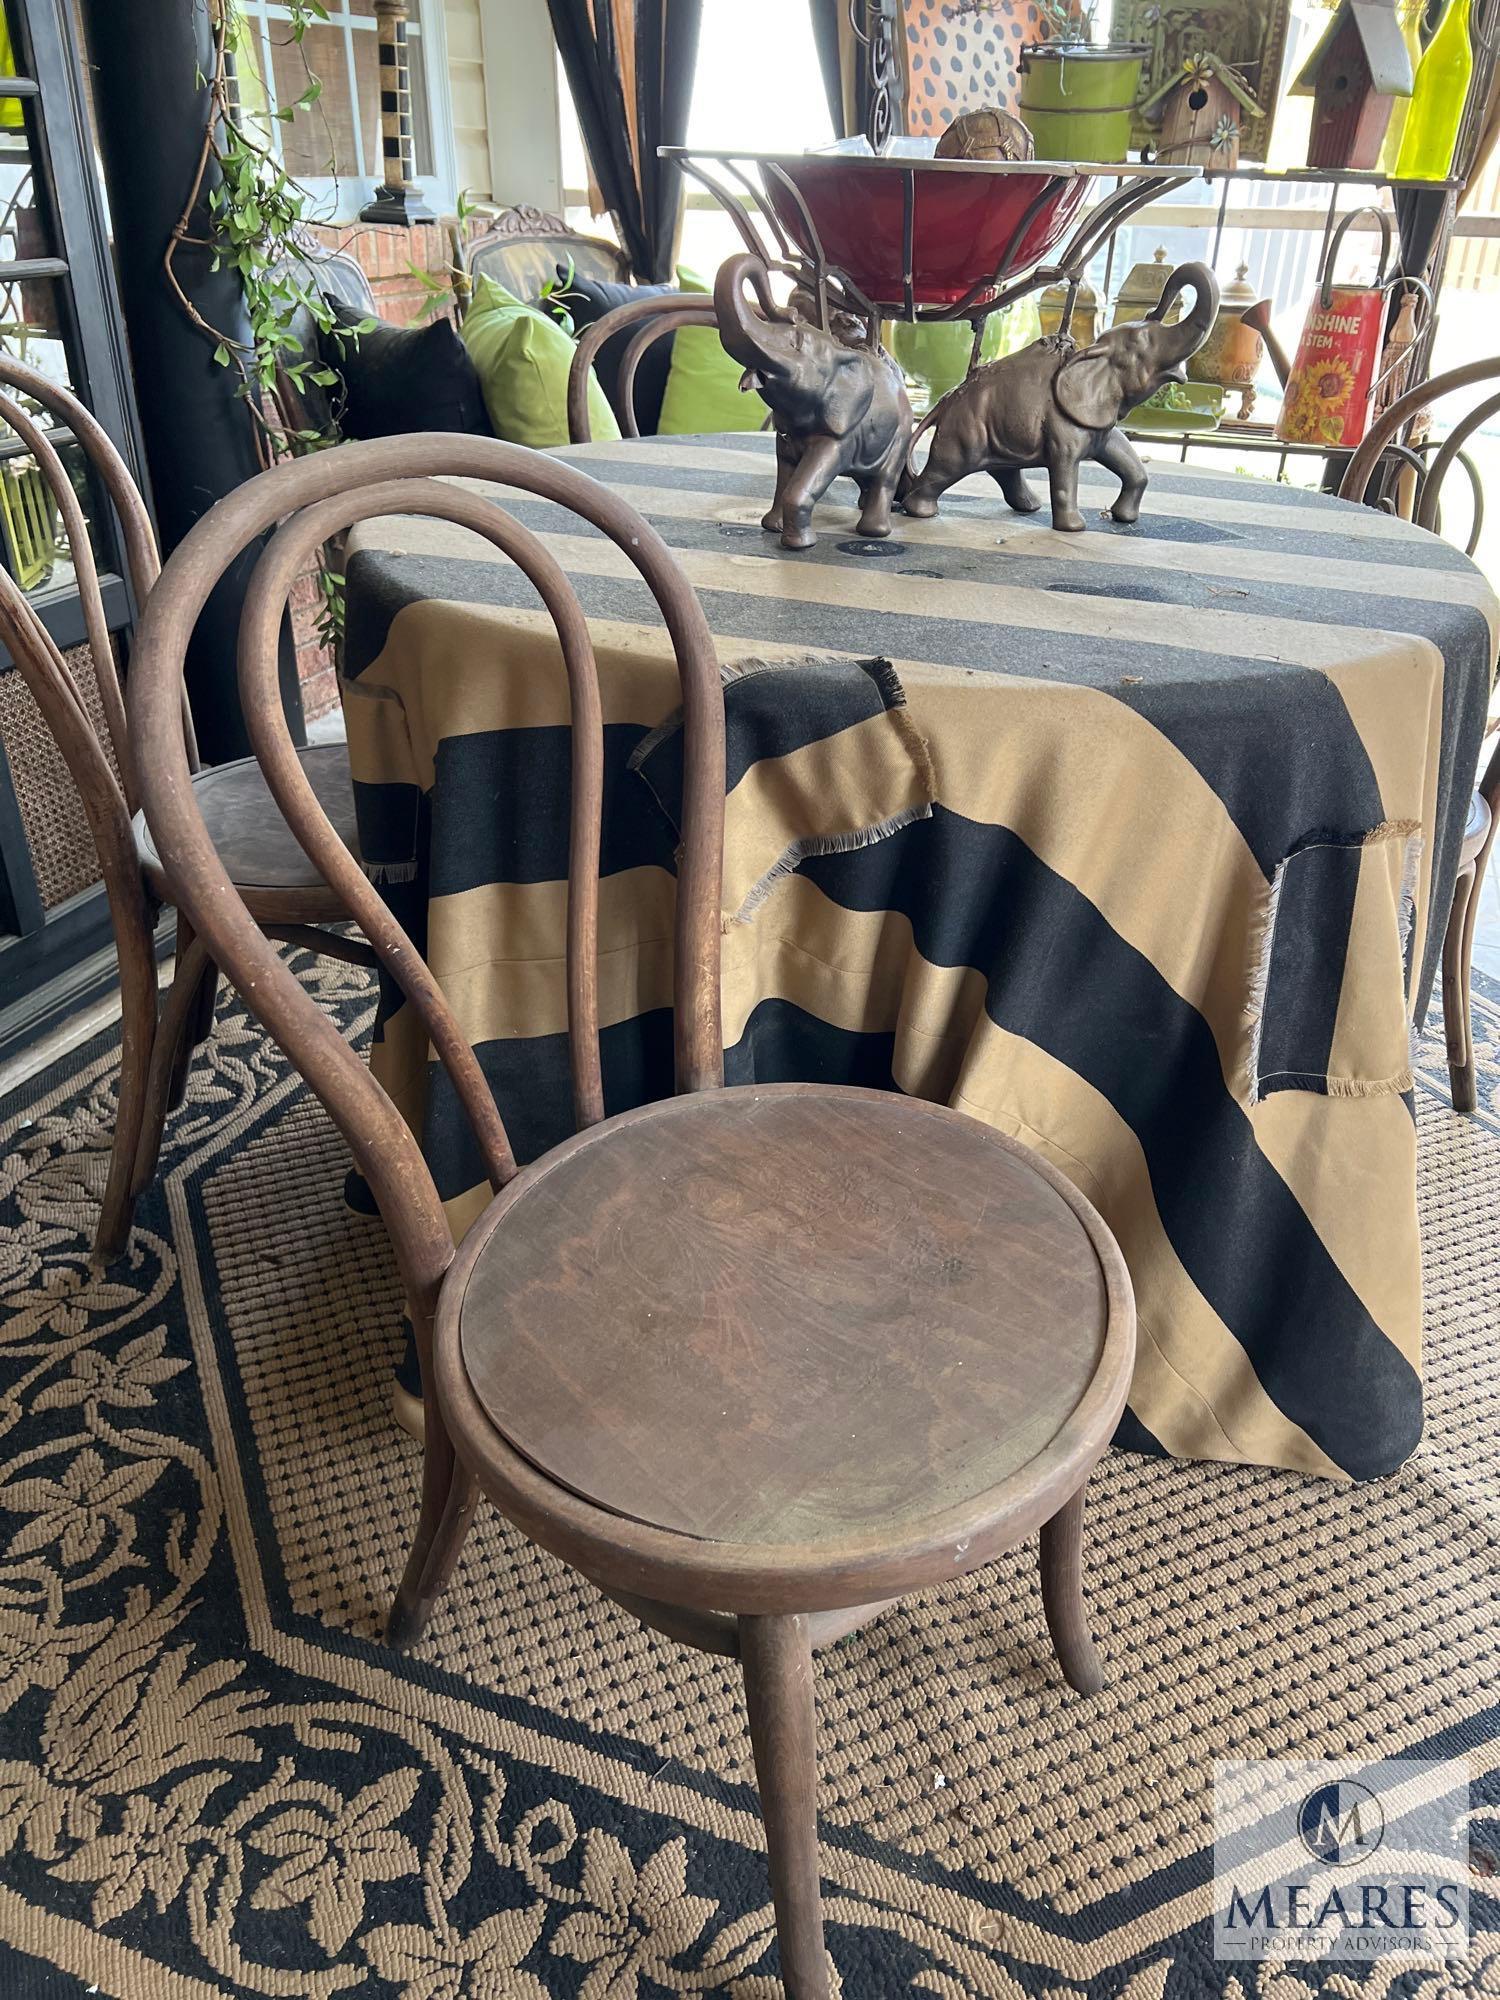 Wooden Patio Table and Chairs, with Elephant Basket and Rug